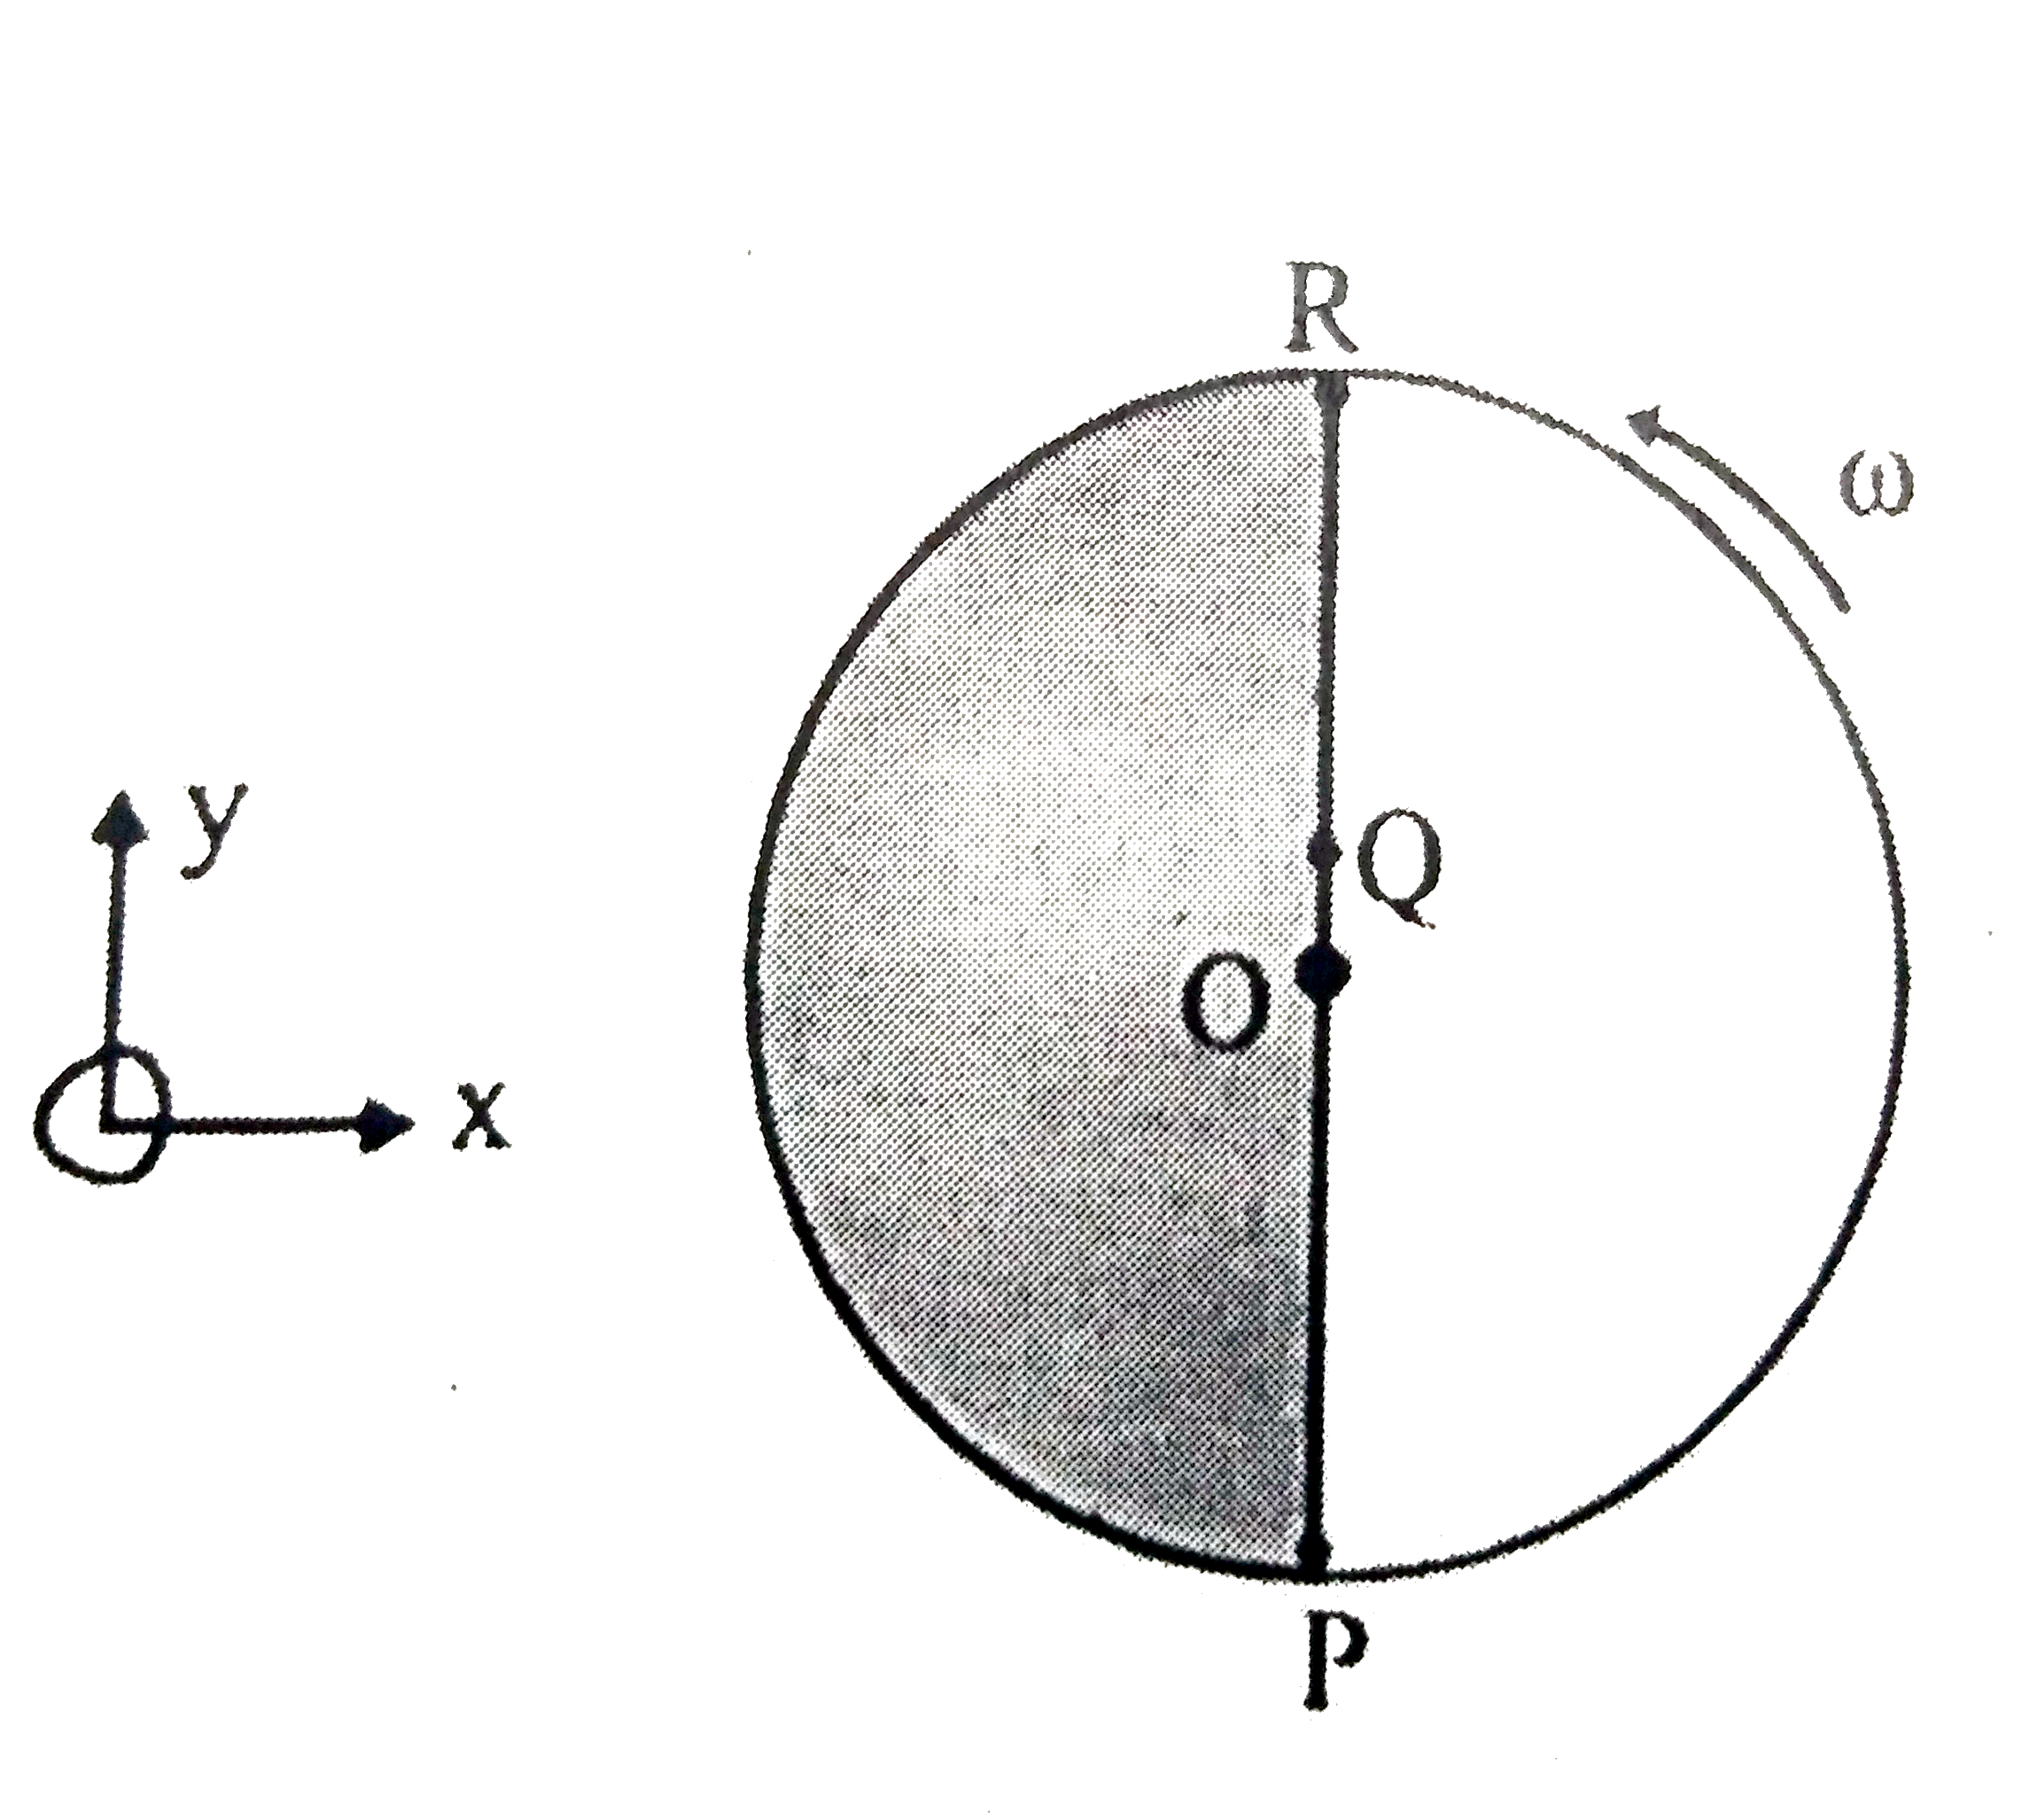 Consider a disc rotating in the horizontal plane with a constant angular speed omega about its centre O . The disc has a shaded region on one side of the diameter and an unshaded region on the other side as shown in the figure. When the disc is in the orientation as shown, two pebbles P and Q are simultaneously projected at an angle towards R. The velocity of projection is in the y-z plane and is same for both pebbles with respect to the disc. Assume that (i) they land back on the disc before the disc has completed (1)/(8) rotation, (ii) their range is less than half the disc radius, and (iii) w remains constant throughout. Then